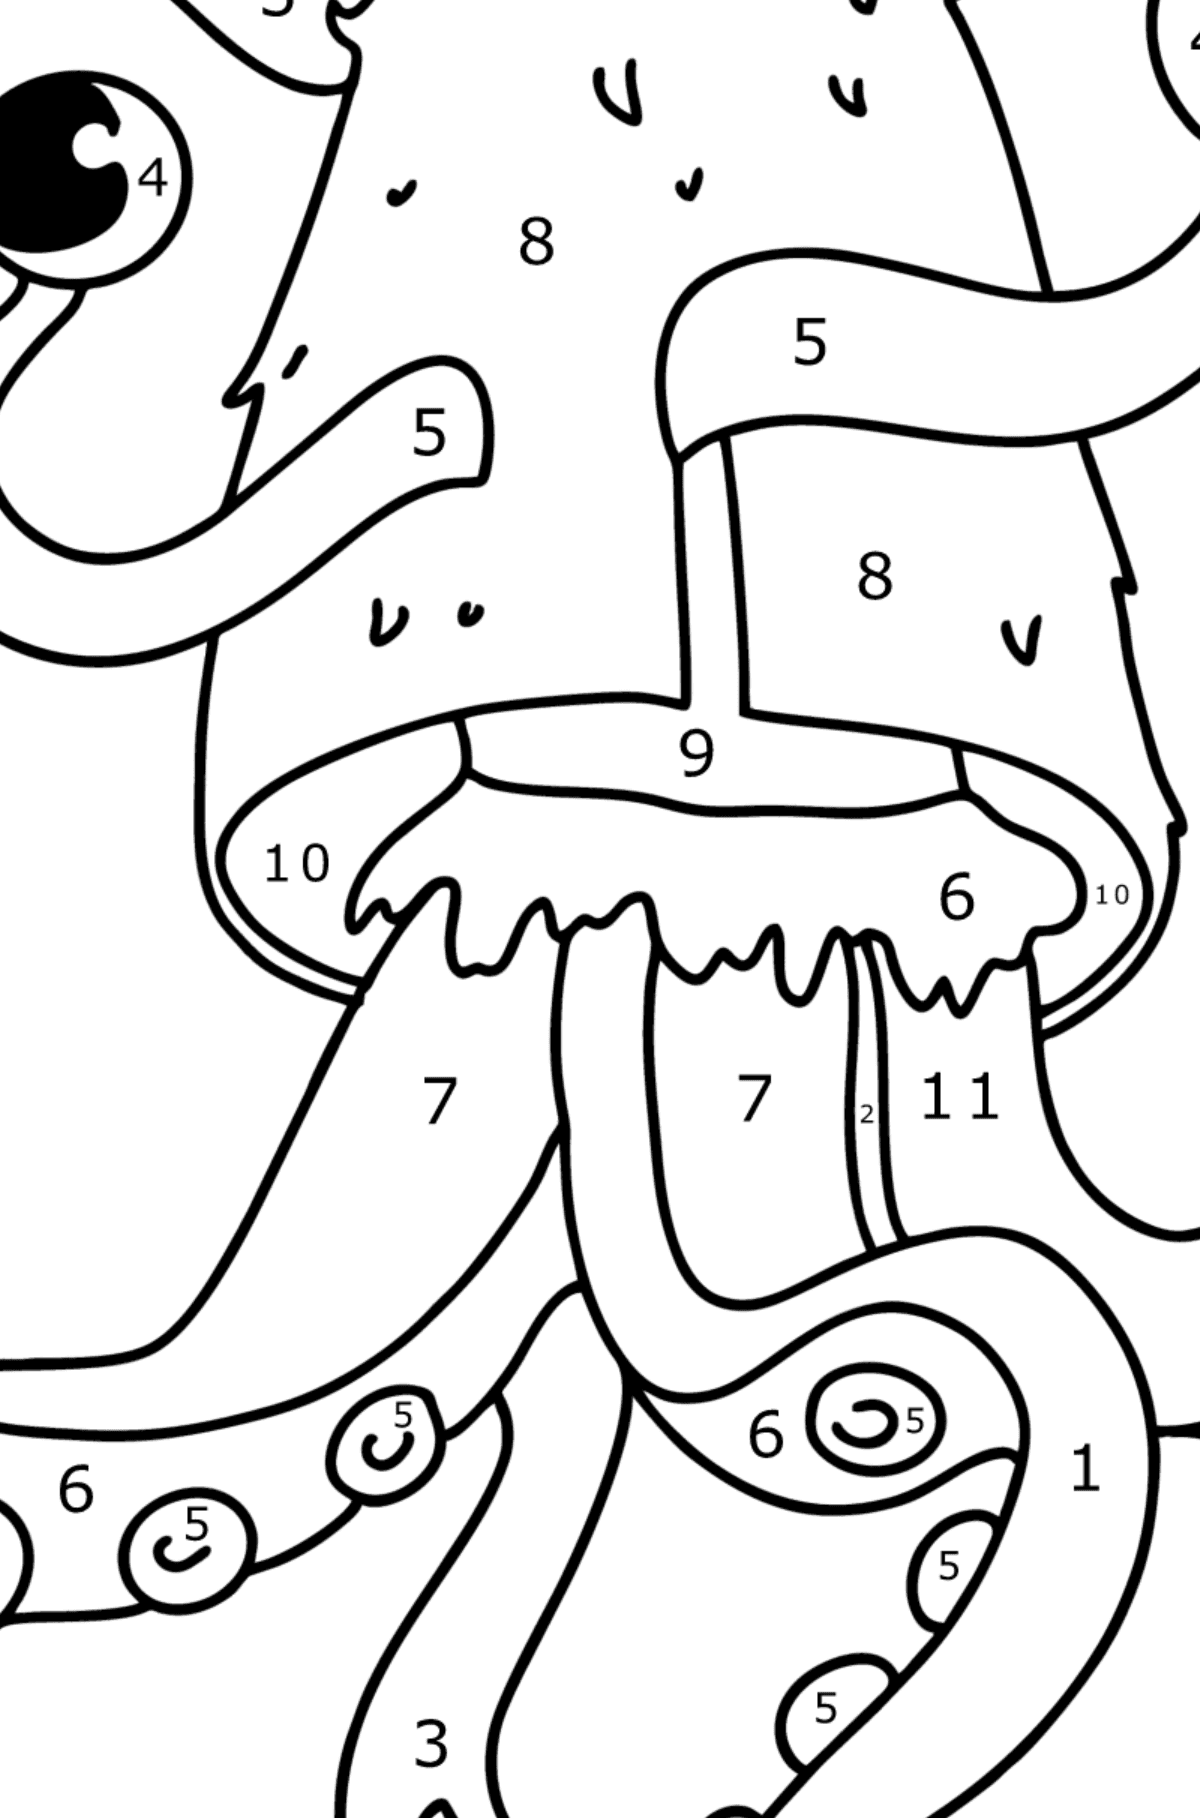 Monster Alien coloring page - Coloring by Numbers for Kids